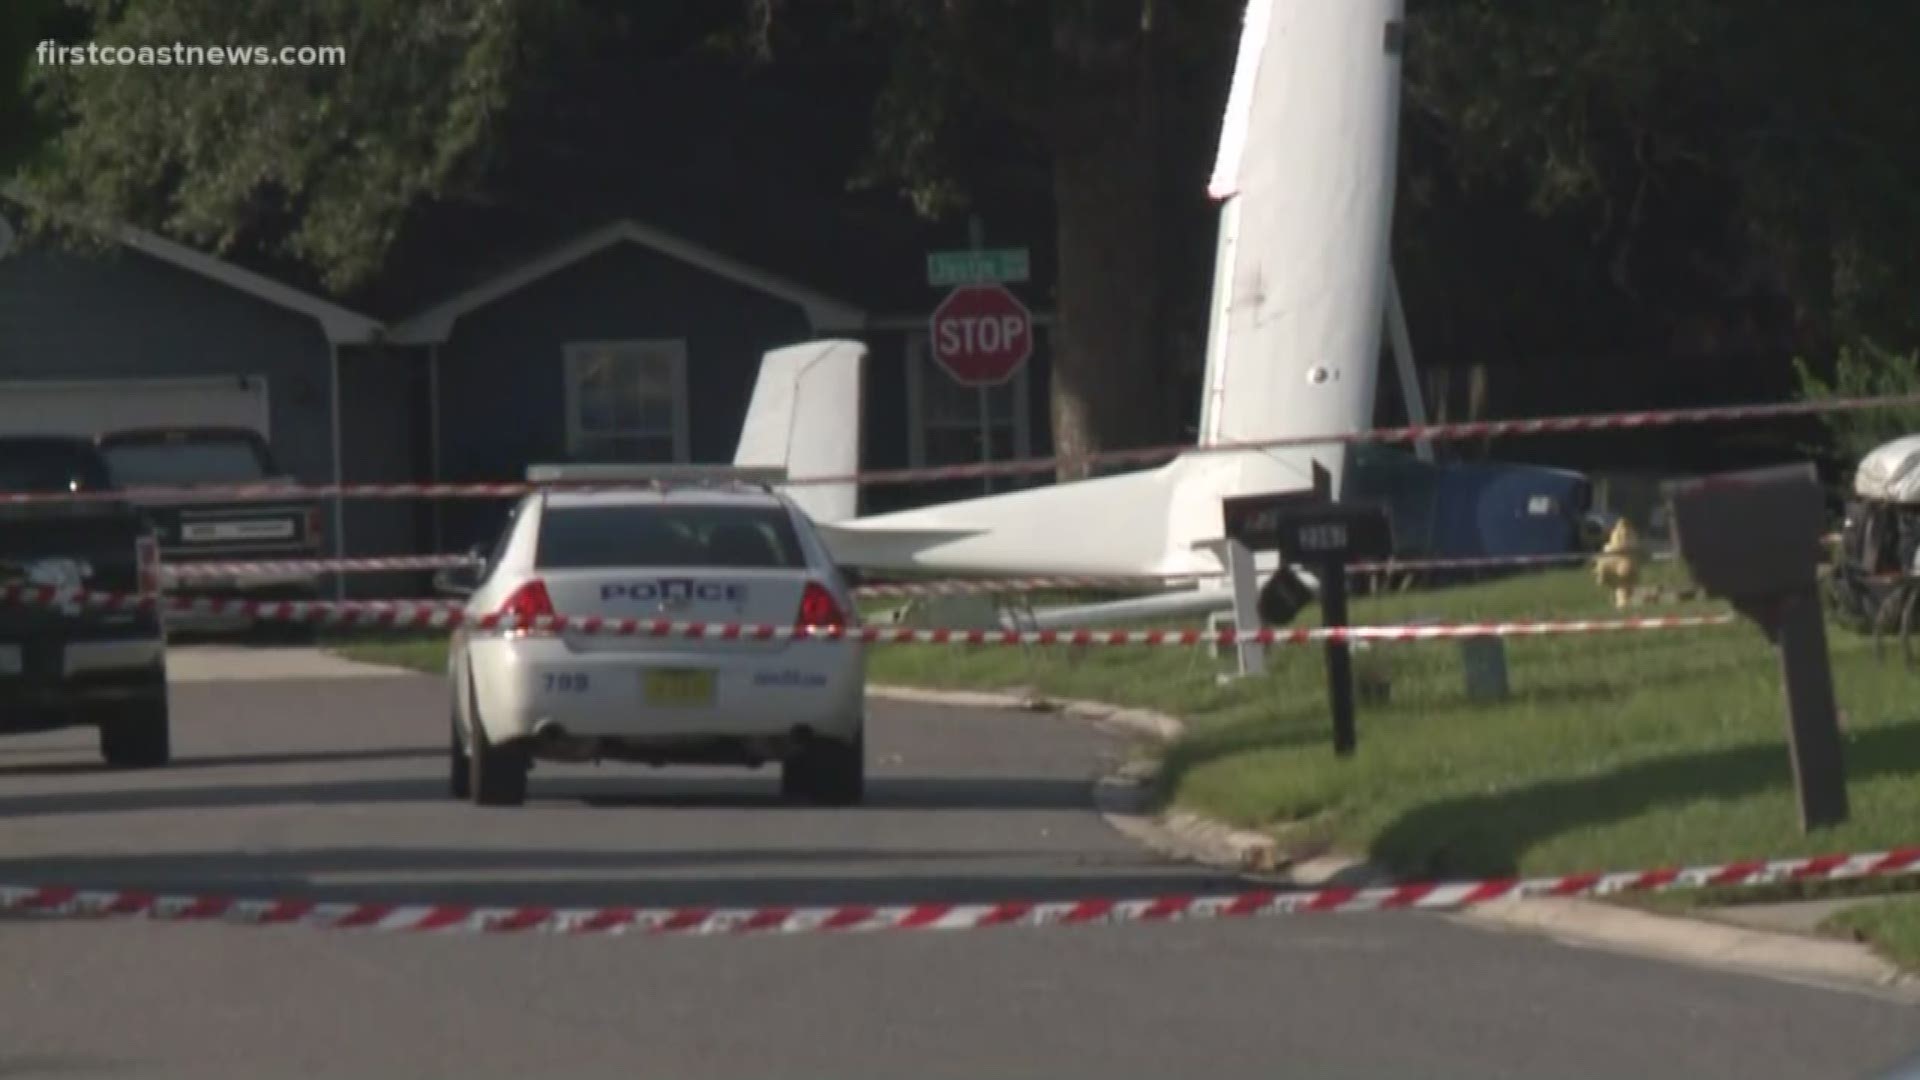 No injuries were reported after a plane crashed in the front yard of a home on the Westside.